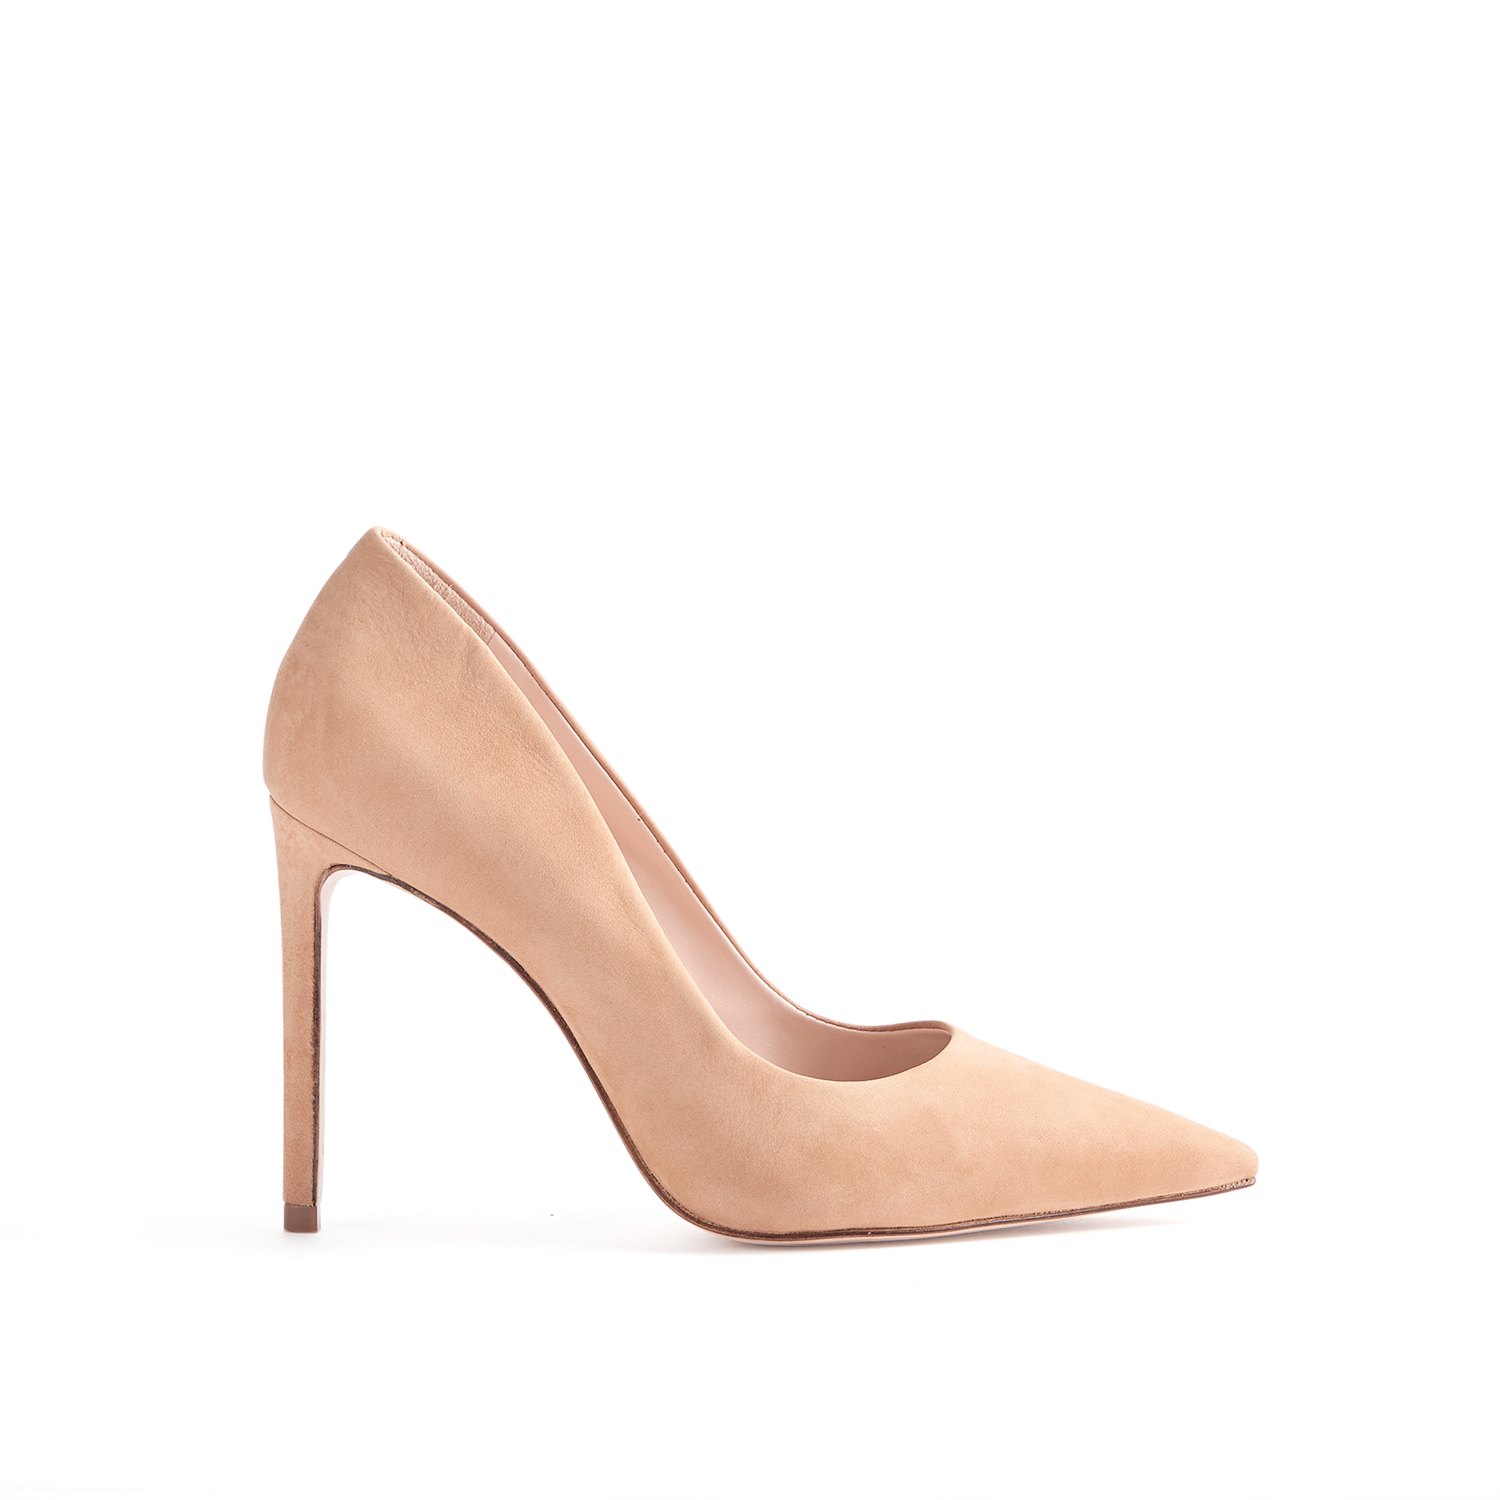 Lou Pump: Classic Shoe with a Pointed Toe